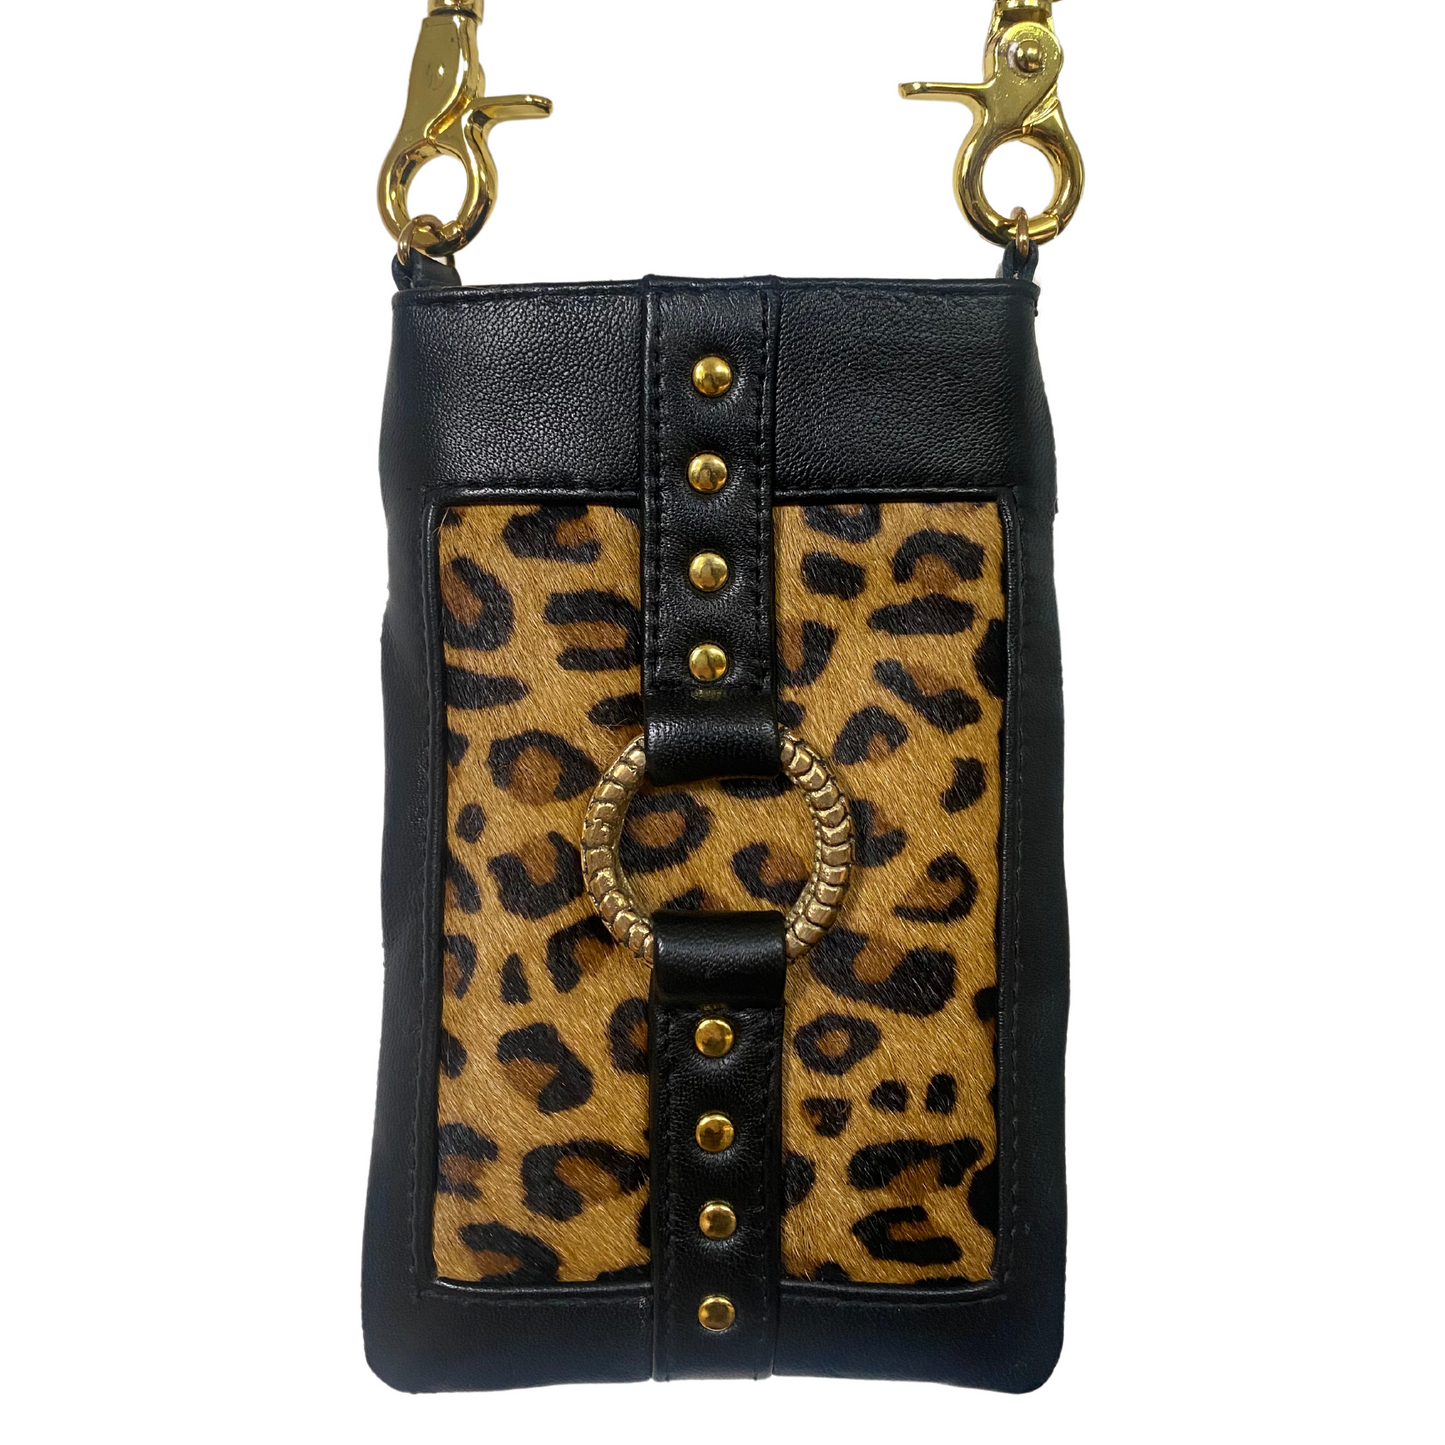 black leather and leopard print mobile phone holster crossbody carry bag for keeping your phone by your side. 